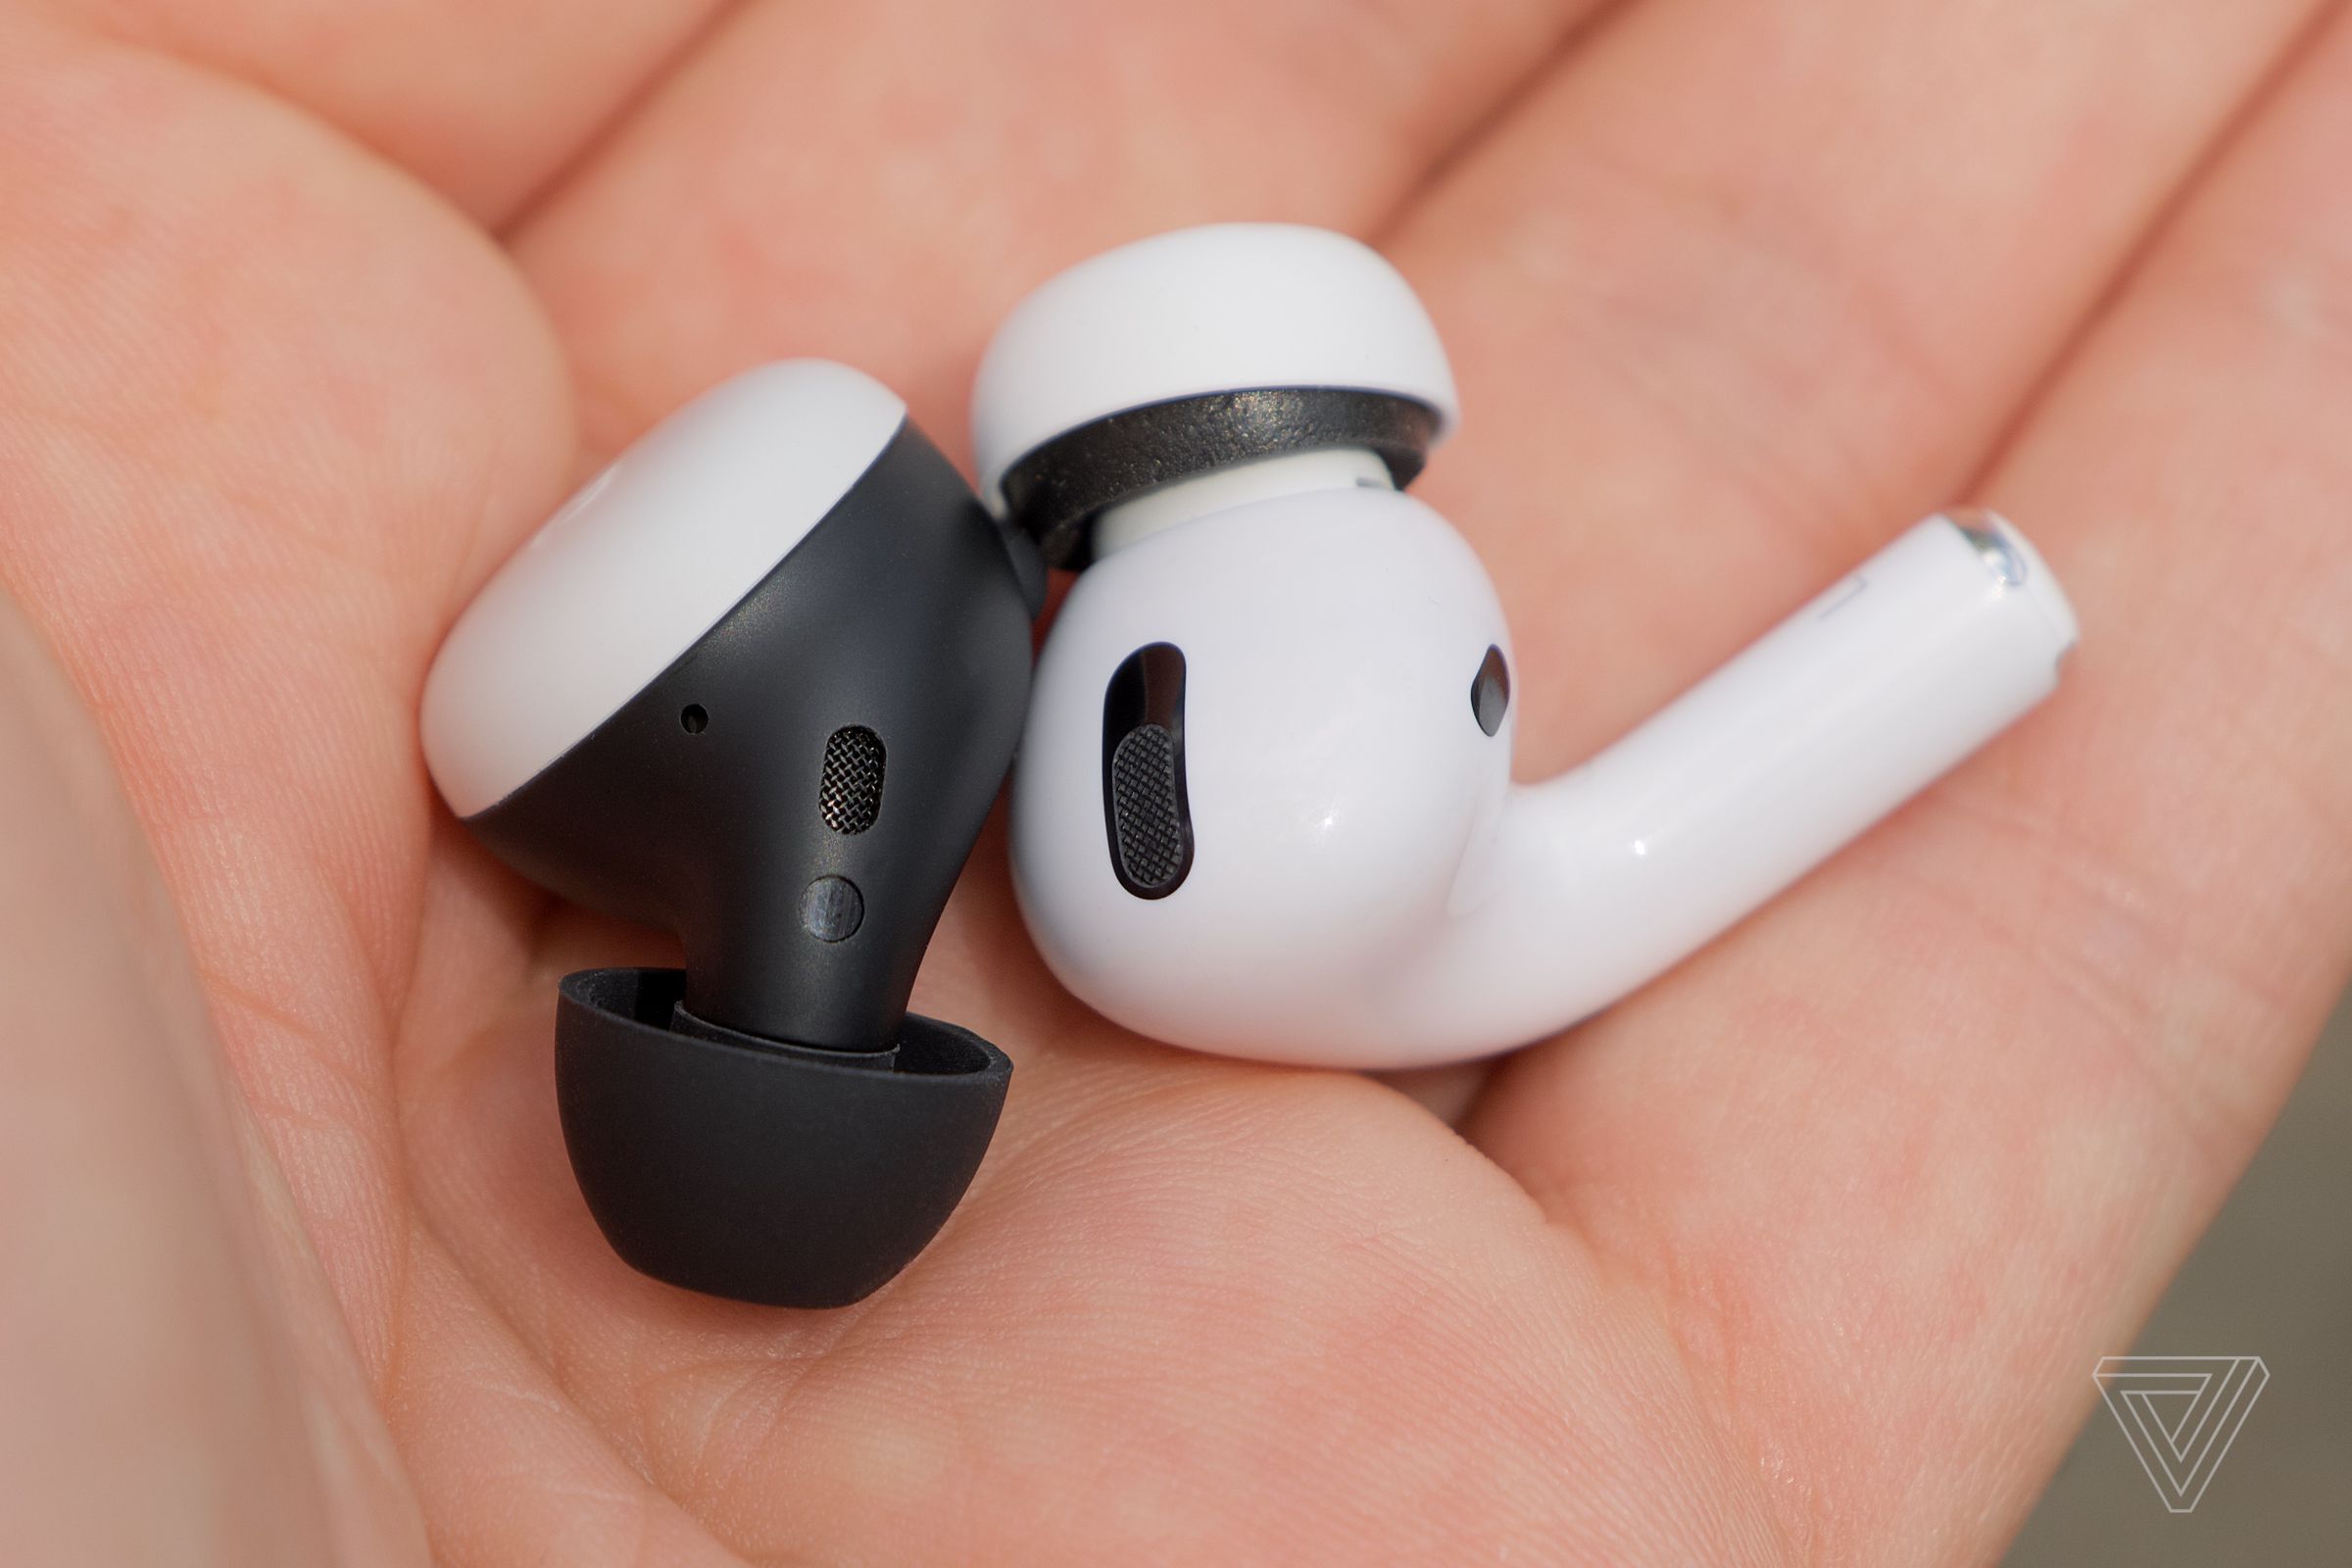 The Pixel Buds have a venting system similar to Apple’s AirPods Pro.